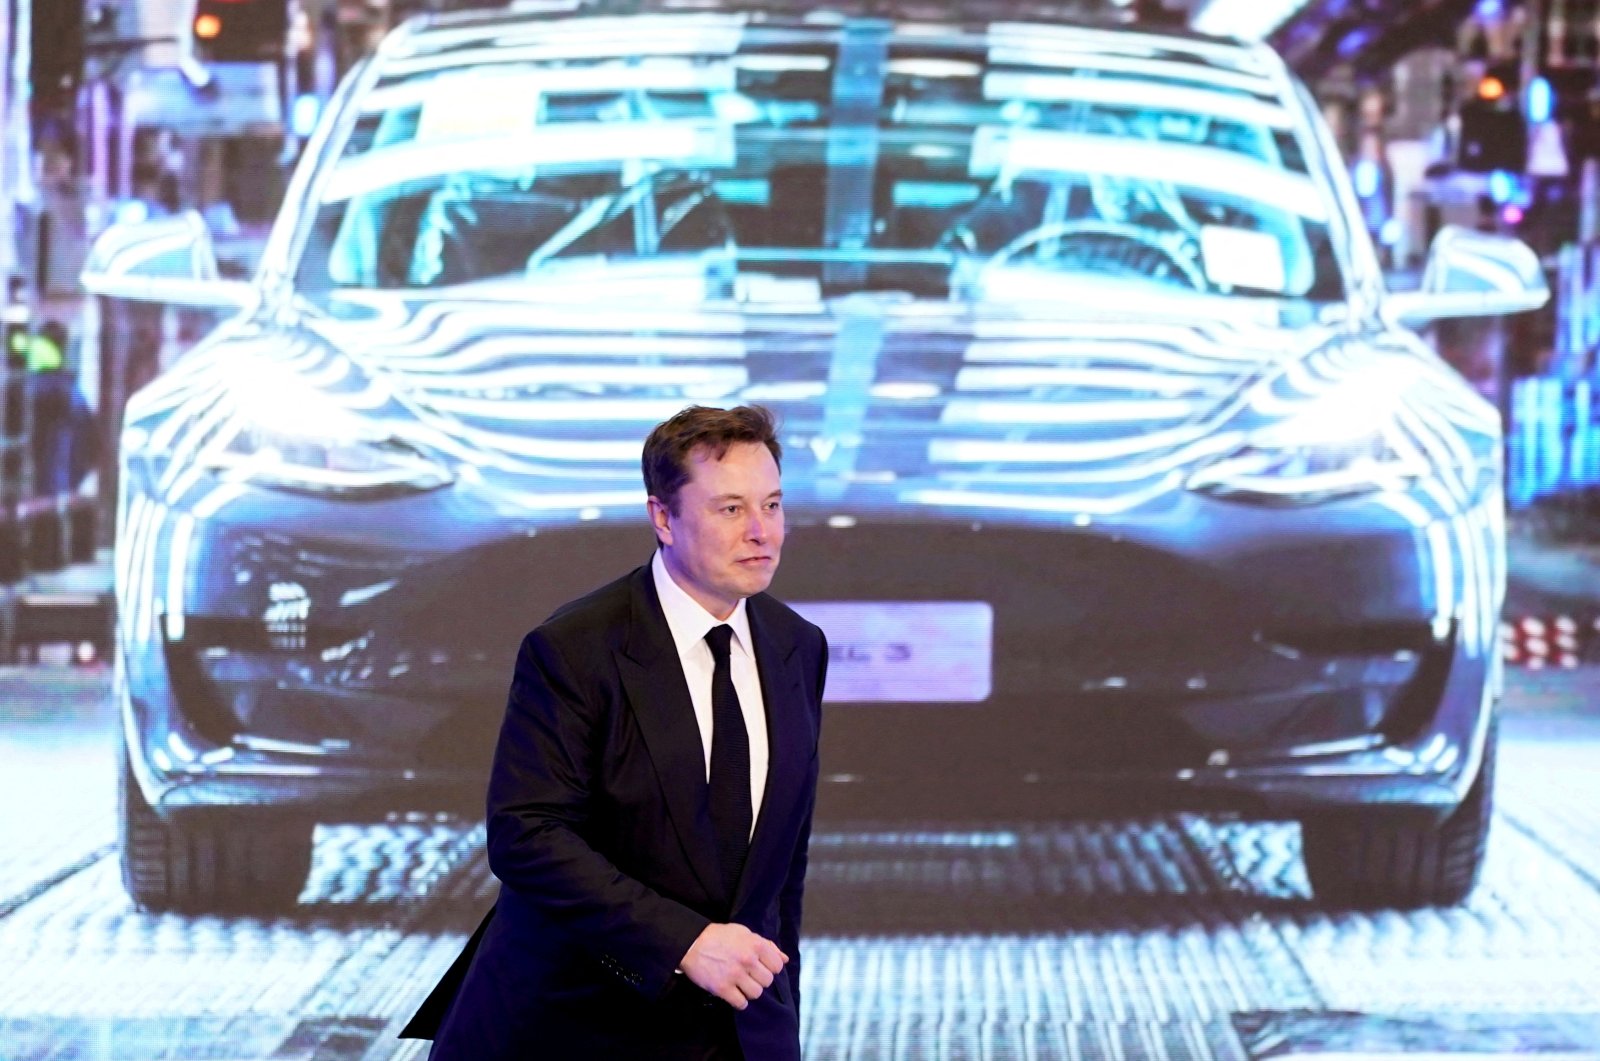 Tesla Inc CEO Elon Musk walks next to a screen showing an image of the Tesla Model 3 car during an opening ceremony for the Tesla China-made Model Y program in Shanghai, China Jan. 7, 2020. (Reuters File Photo)